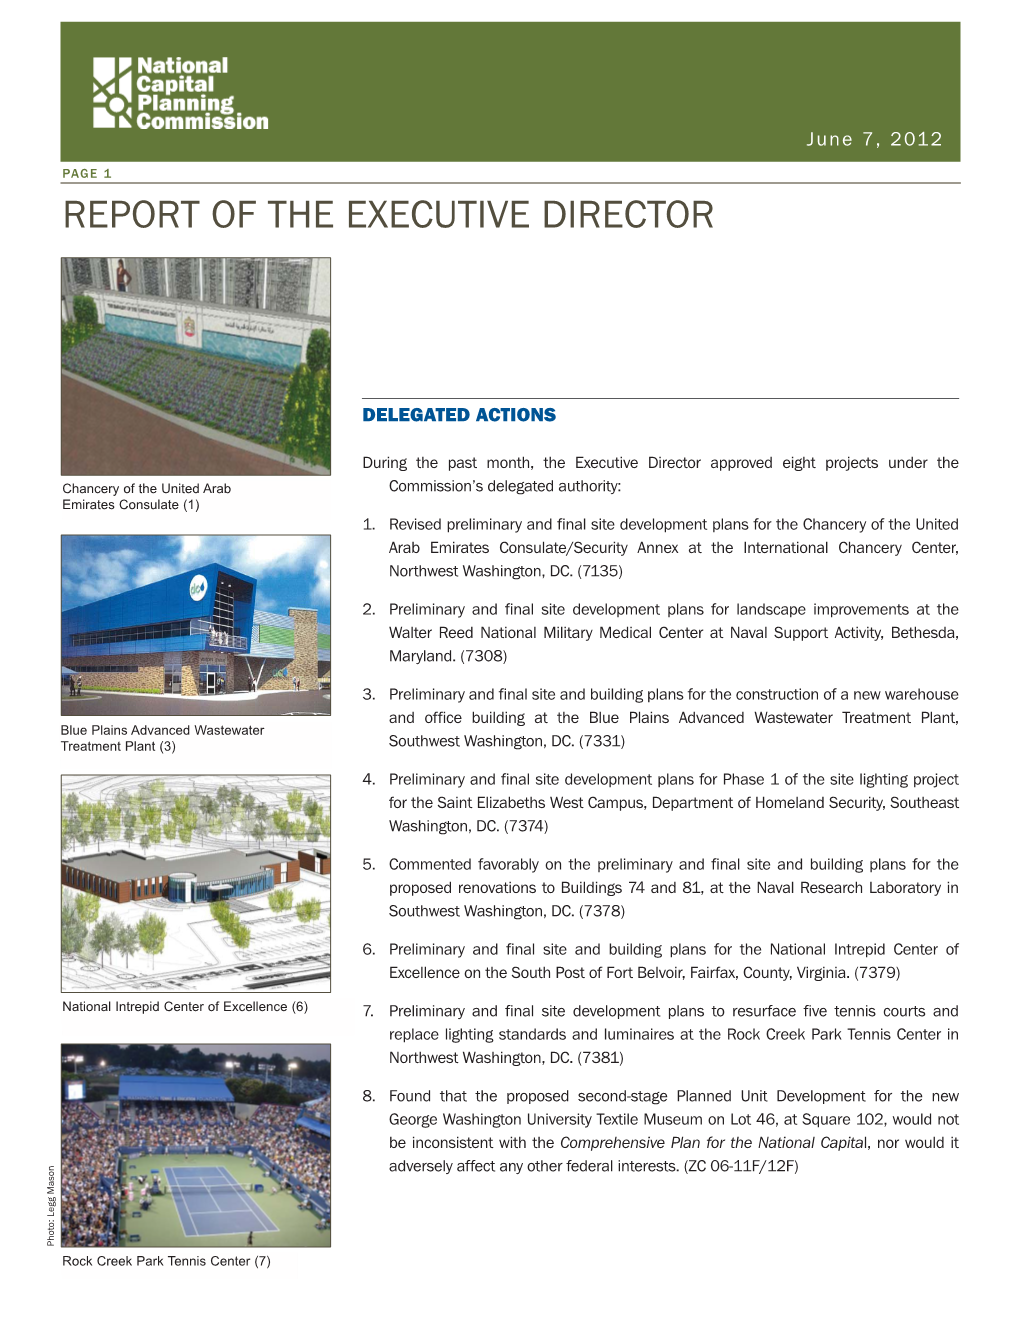 Report of the Executive Director